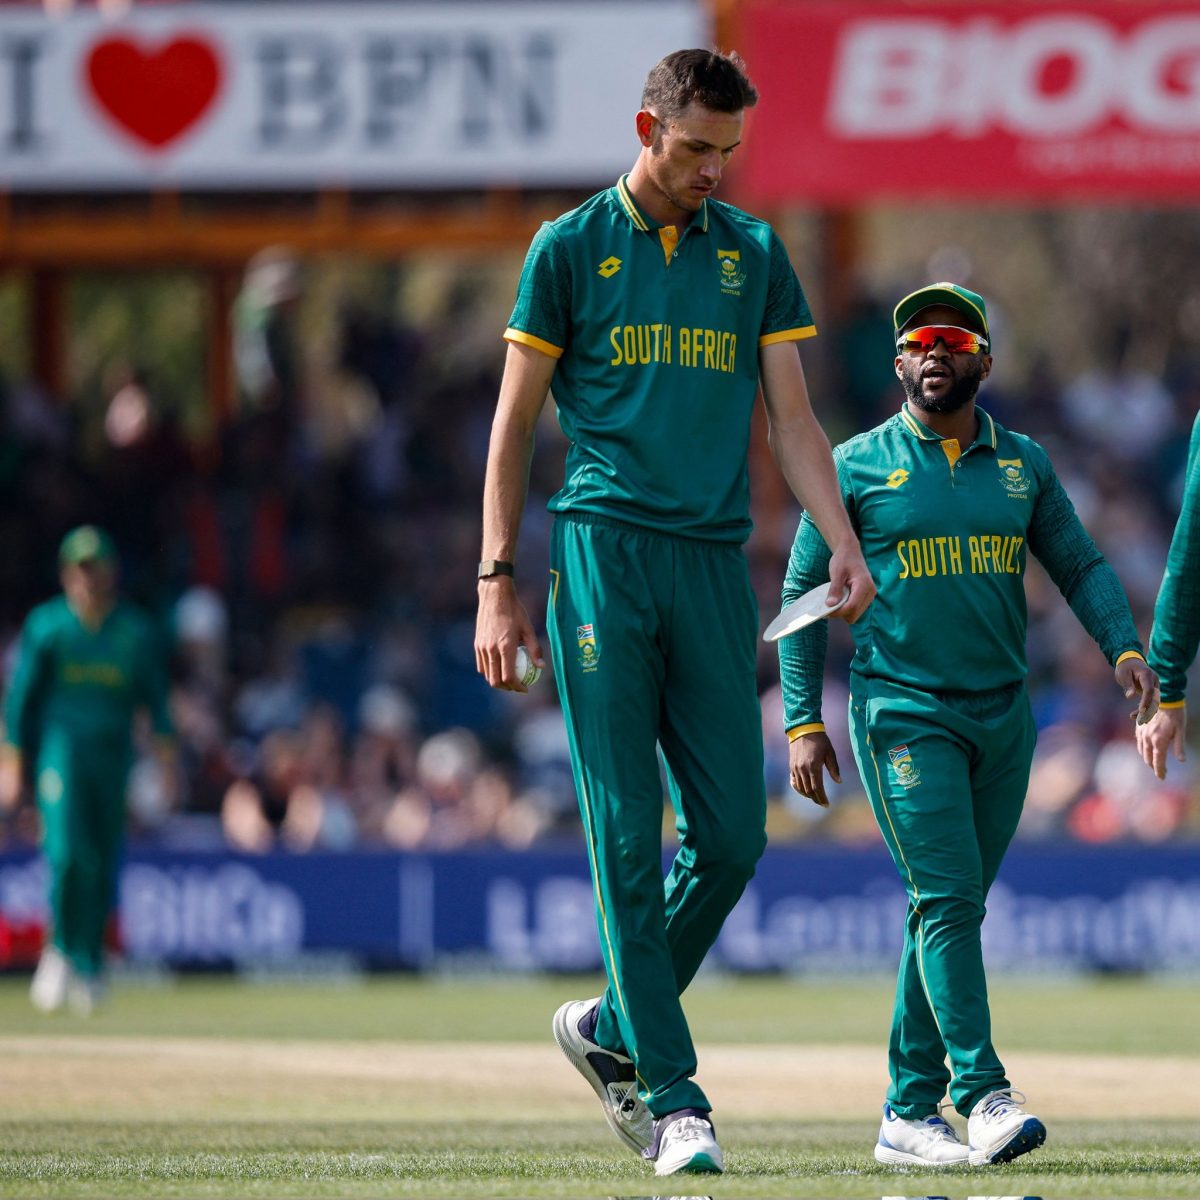 GIANT PERFORMANCE! Marco Jansen took a five-for and made 47 runs in South Africa’s victory yesterday. (Reuters photo)